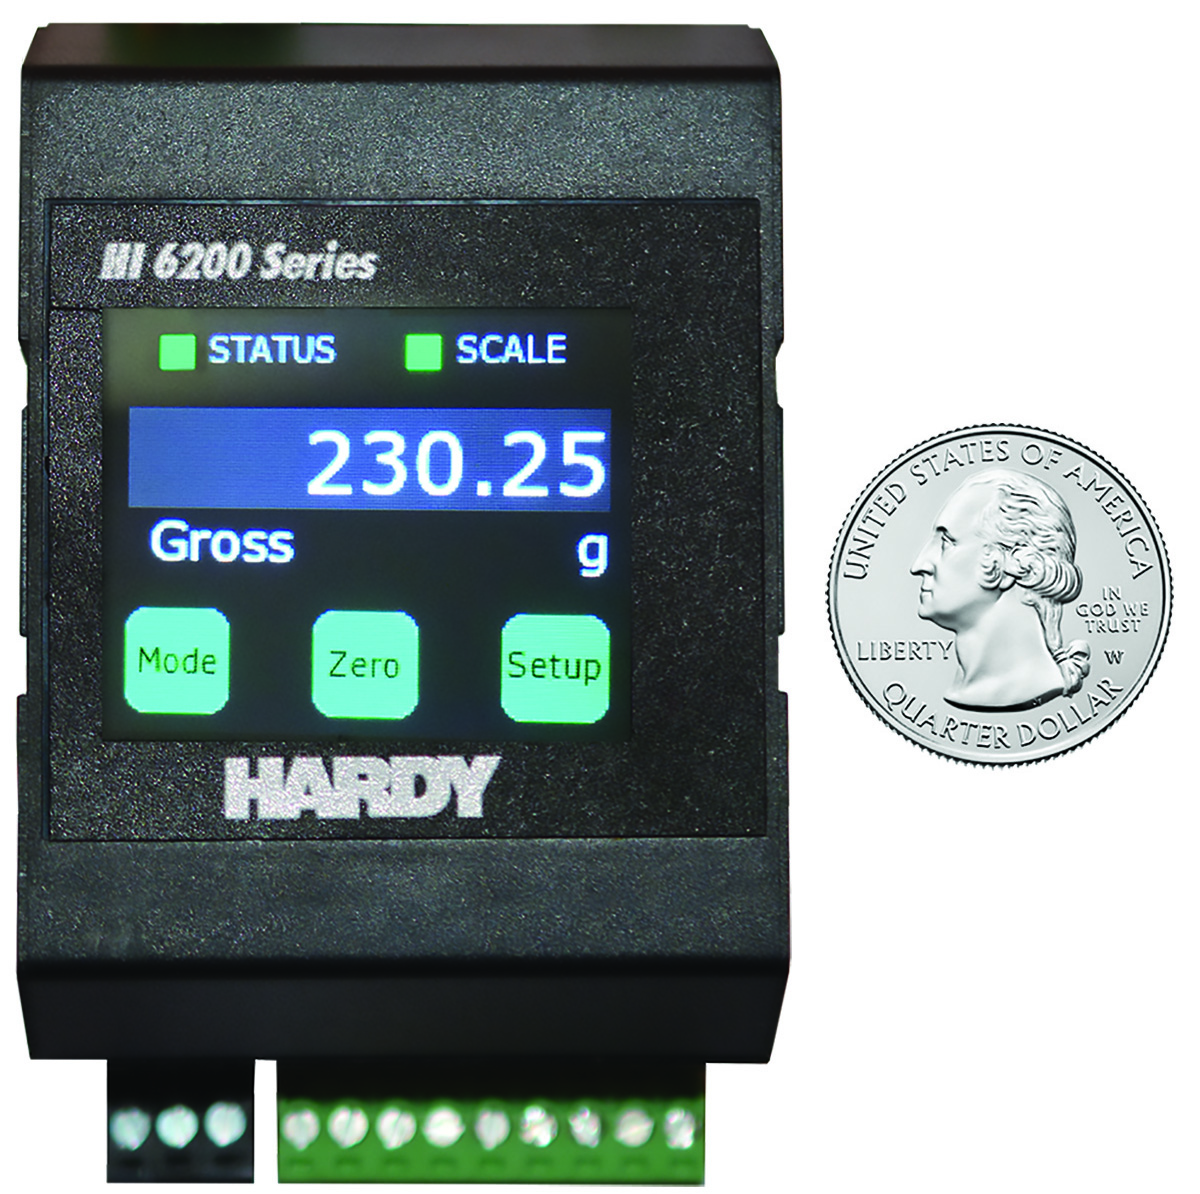 Hardy Small and Mighty HI 6200 Weight Processor